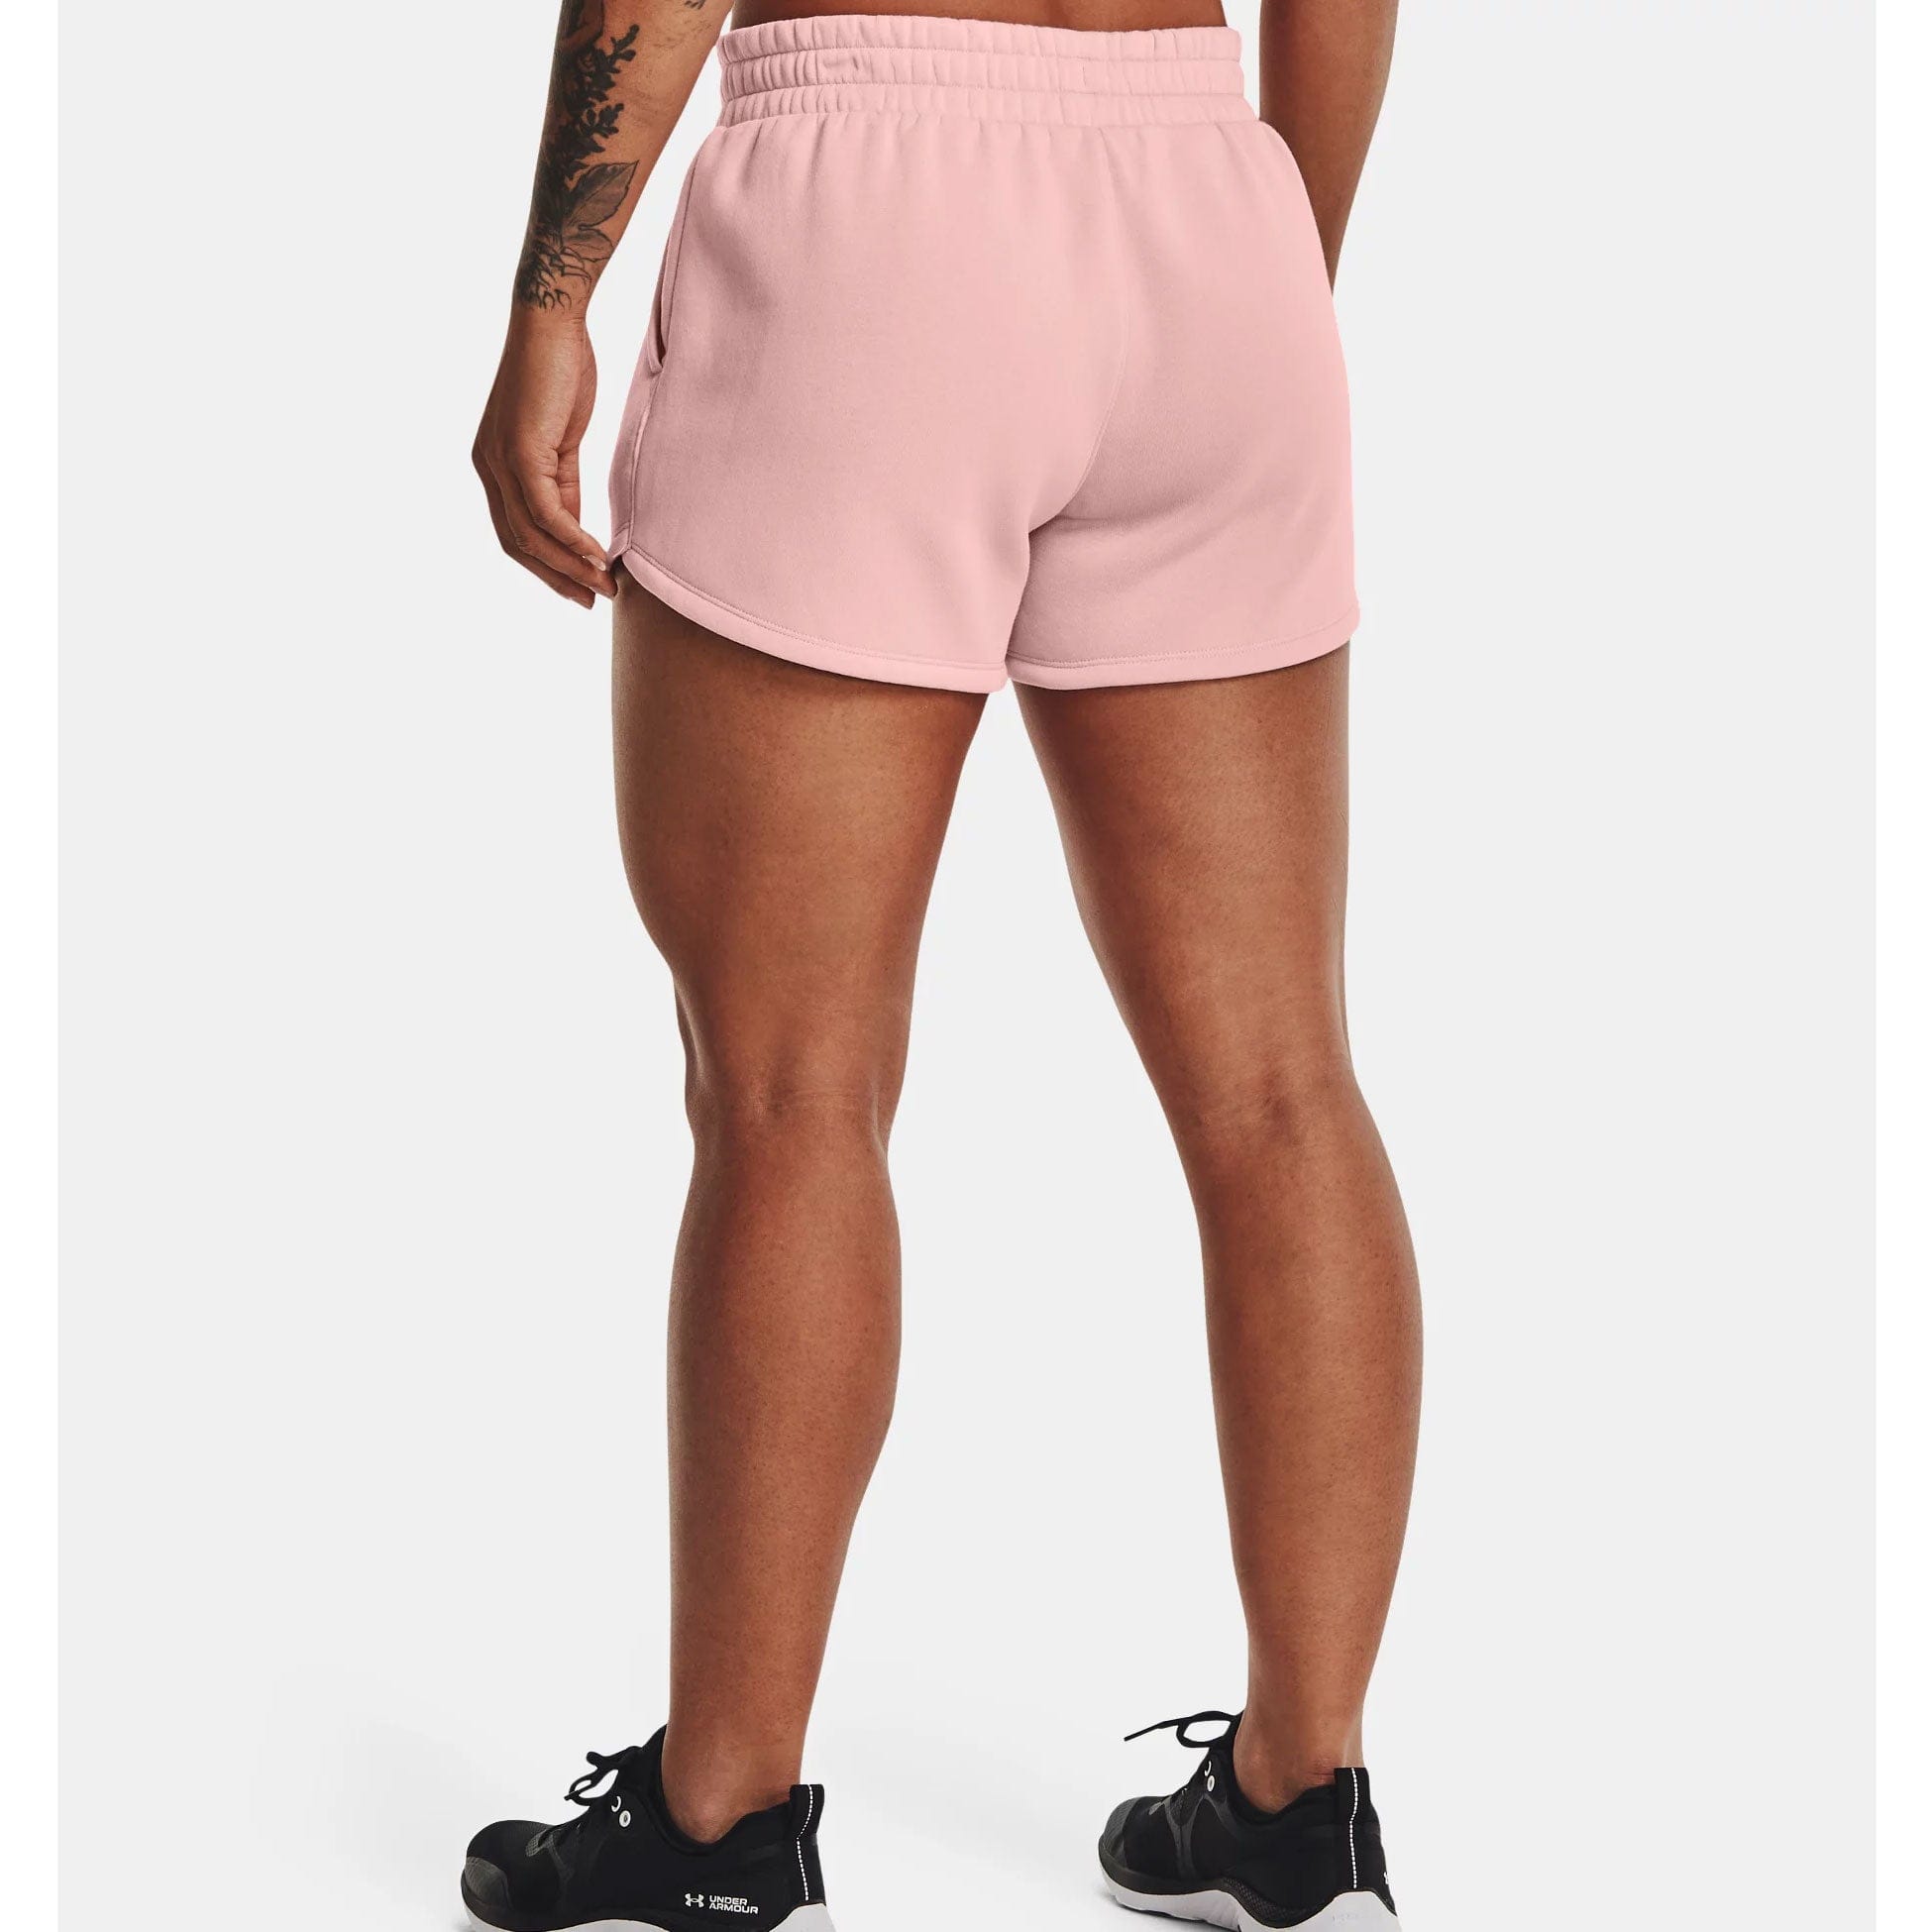 Under Armour Heat Gear Shorts Womens XS Black Pink Fitted 2.5 inseam